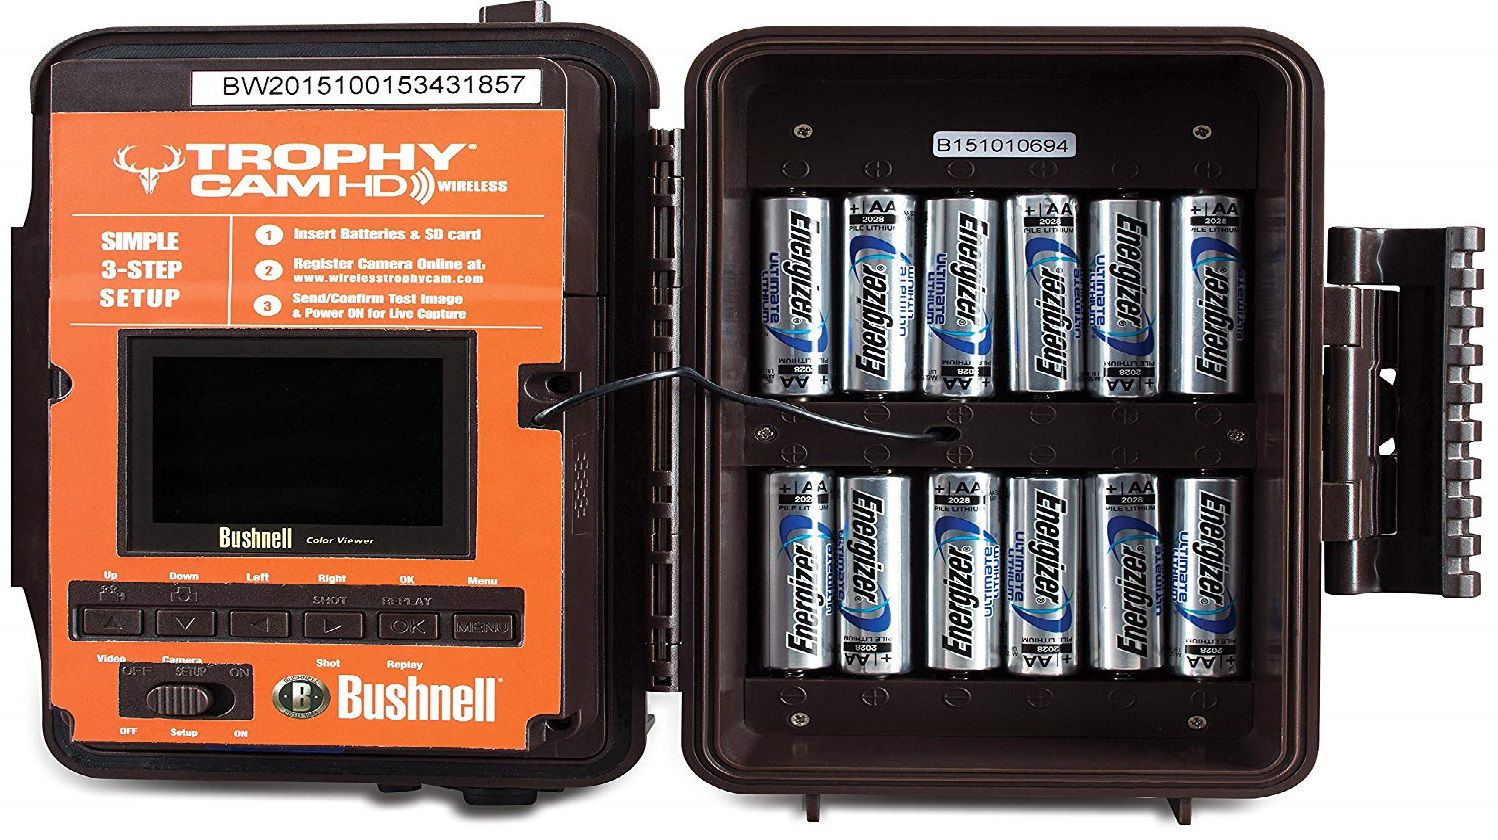 Bushnell 119599C2 Trophy Wireless Trail Camera Review